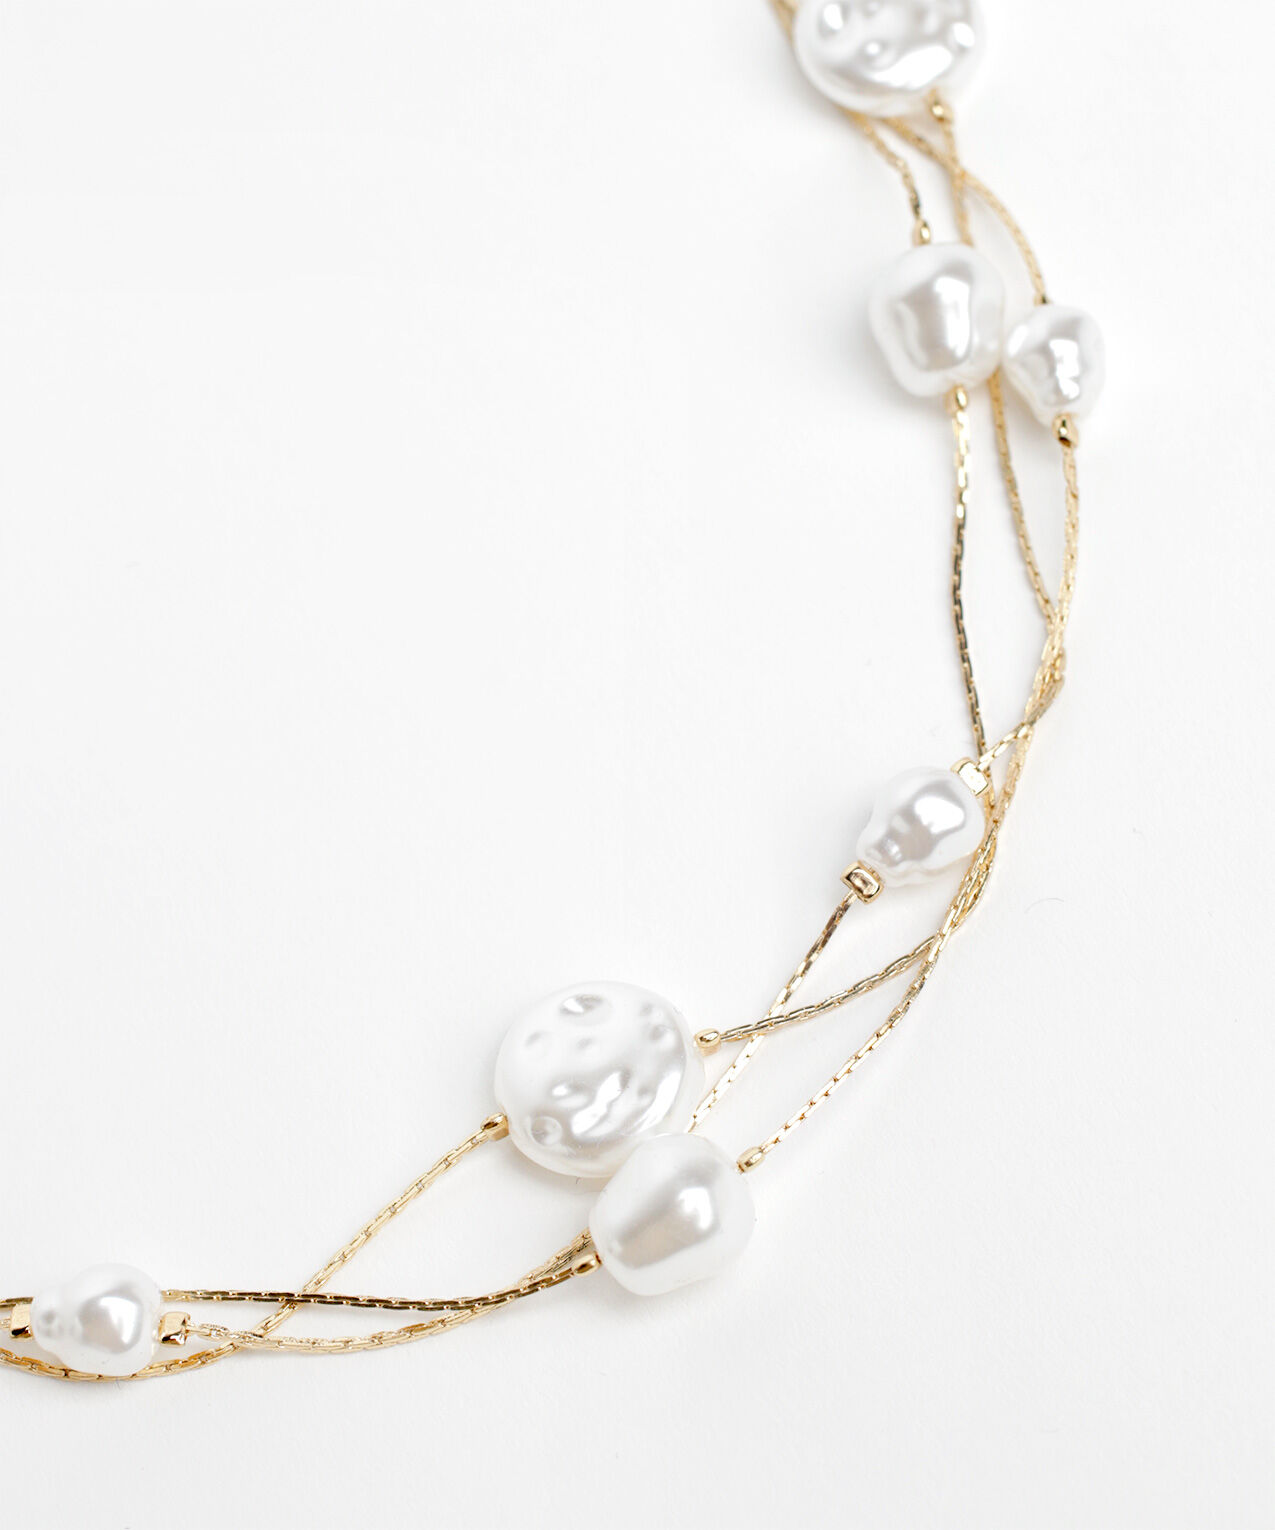 Short 3-Tier Gold Necklace with Pearls